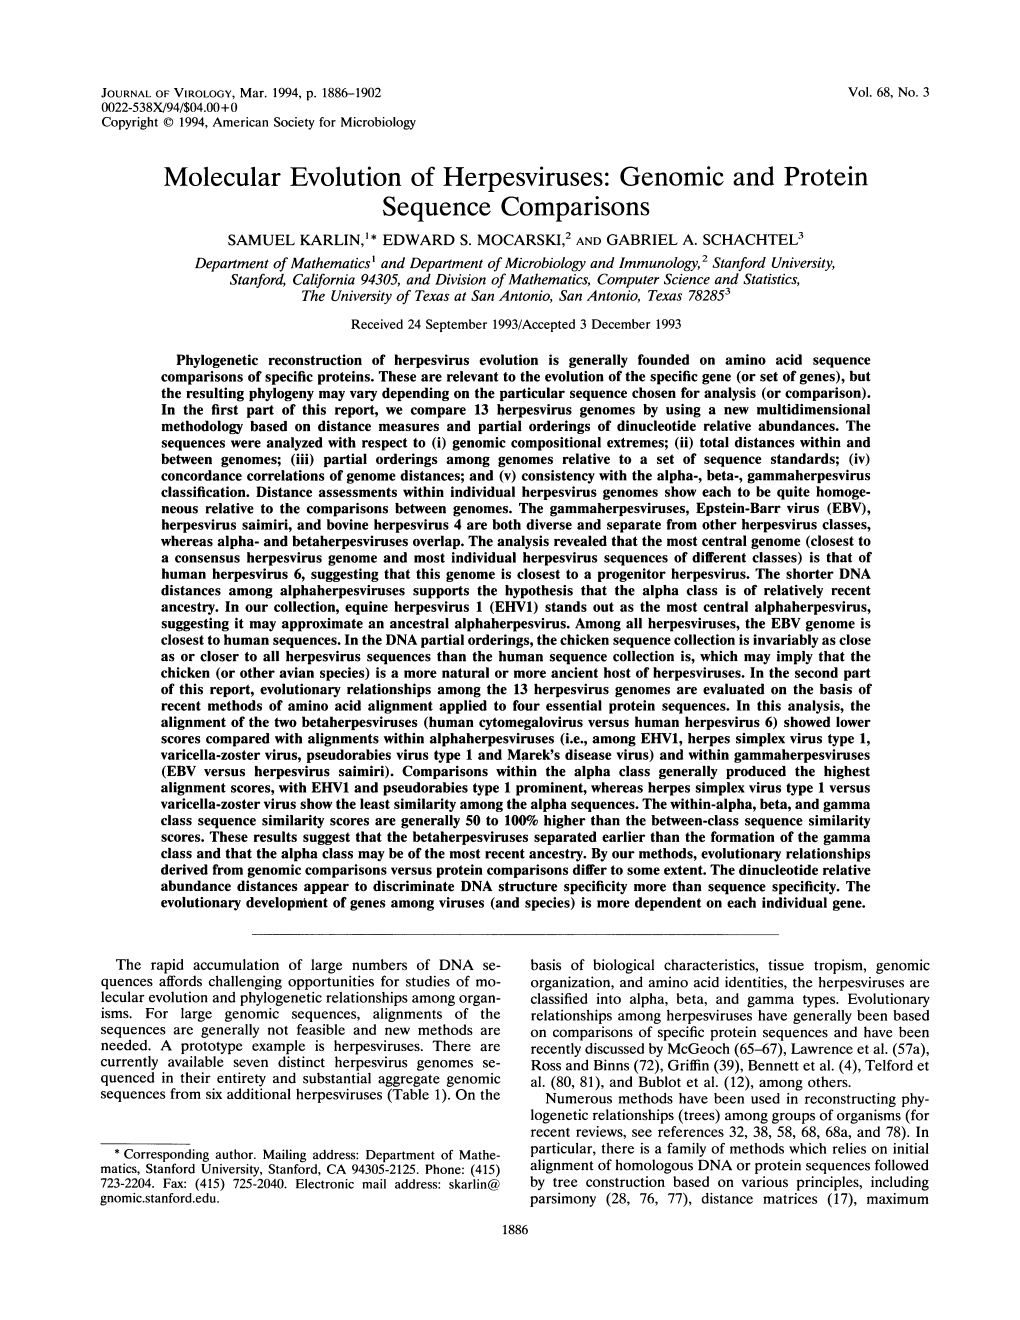 Genomic and Protein Sequence Comparisons SAMUEL KARLIN,'* EDWARD S